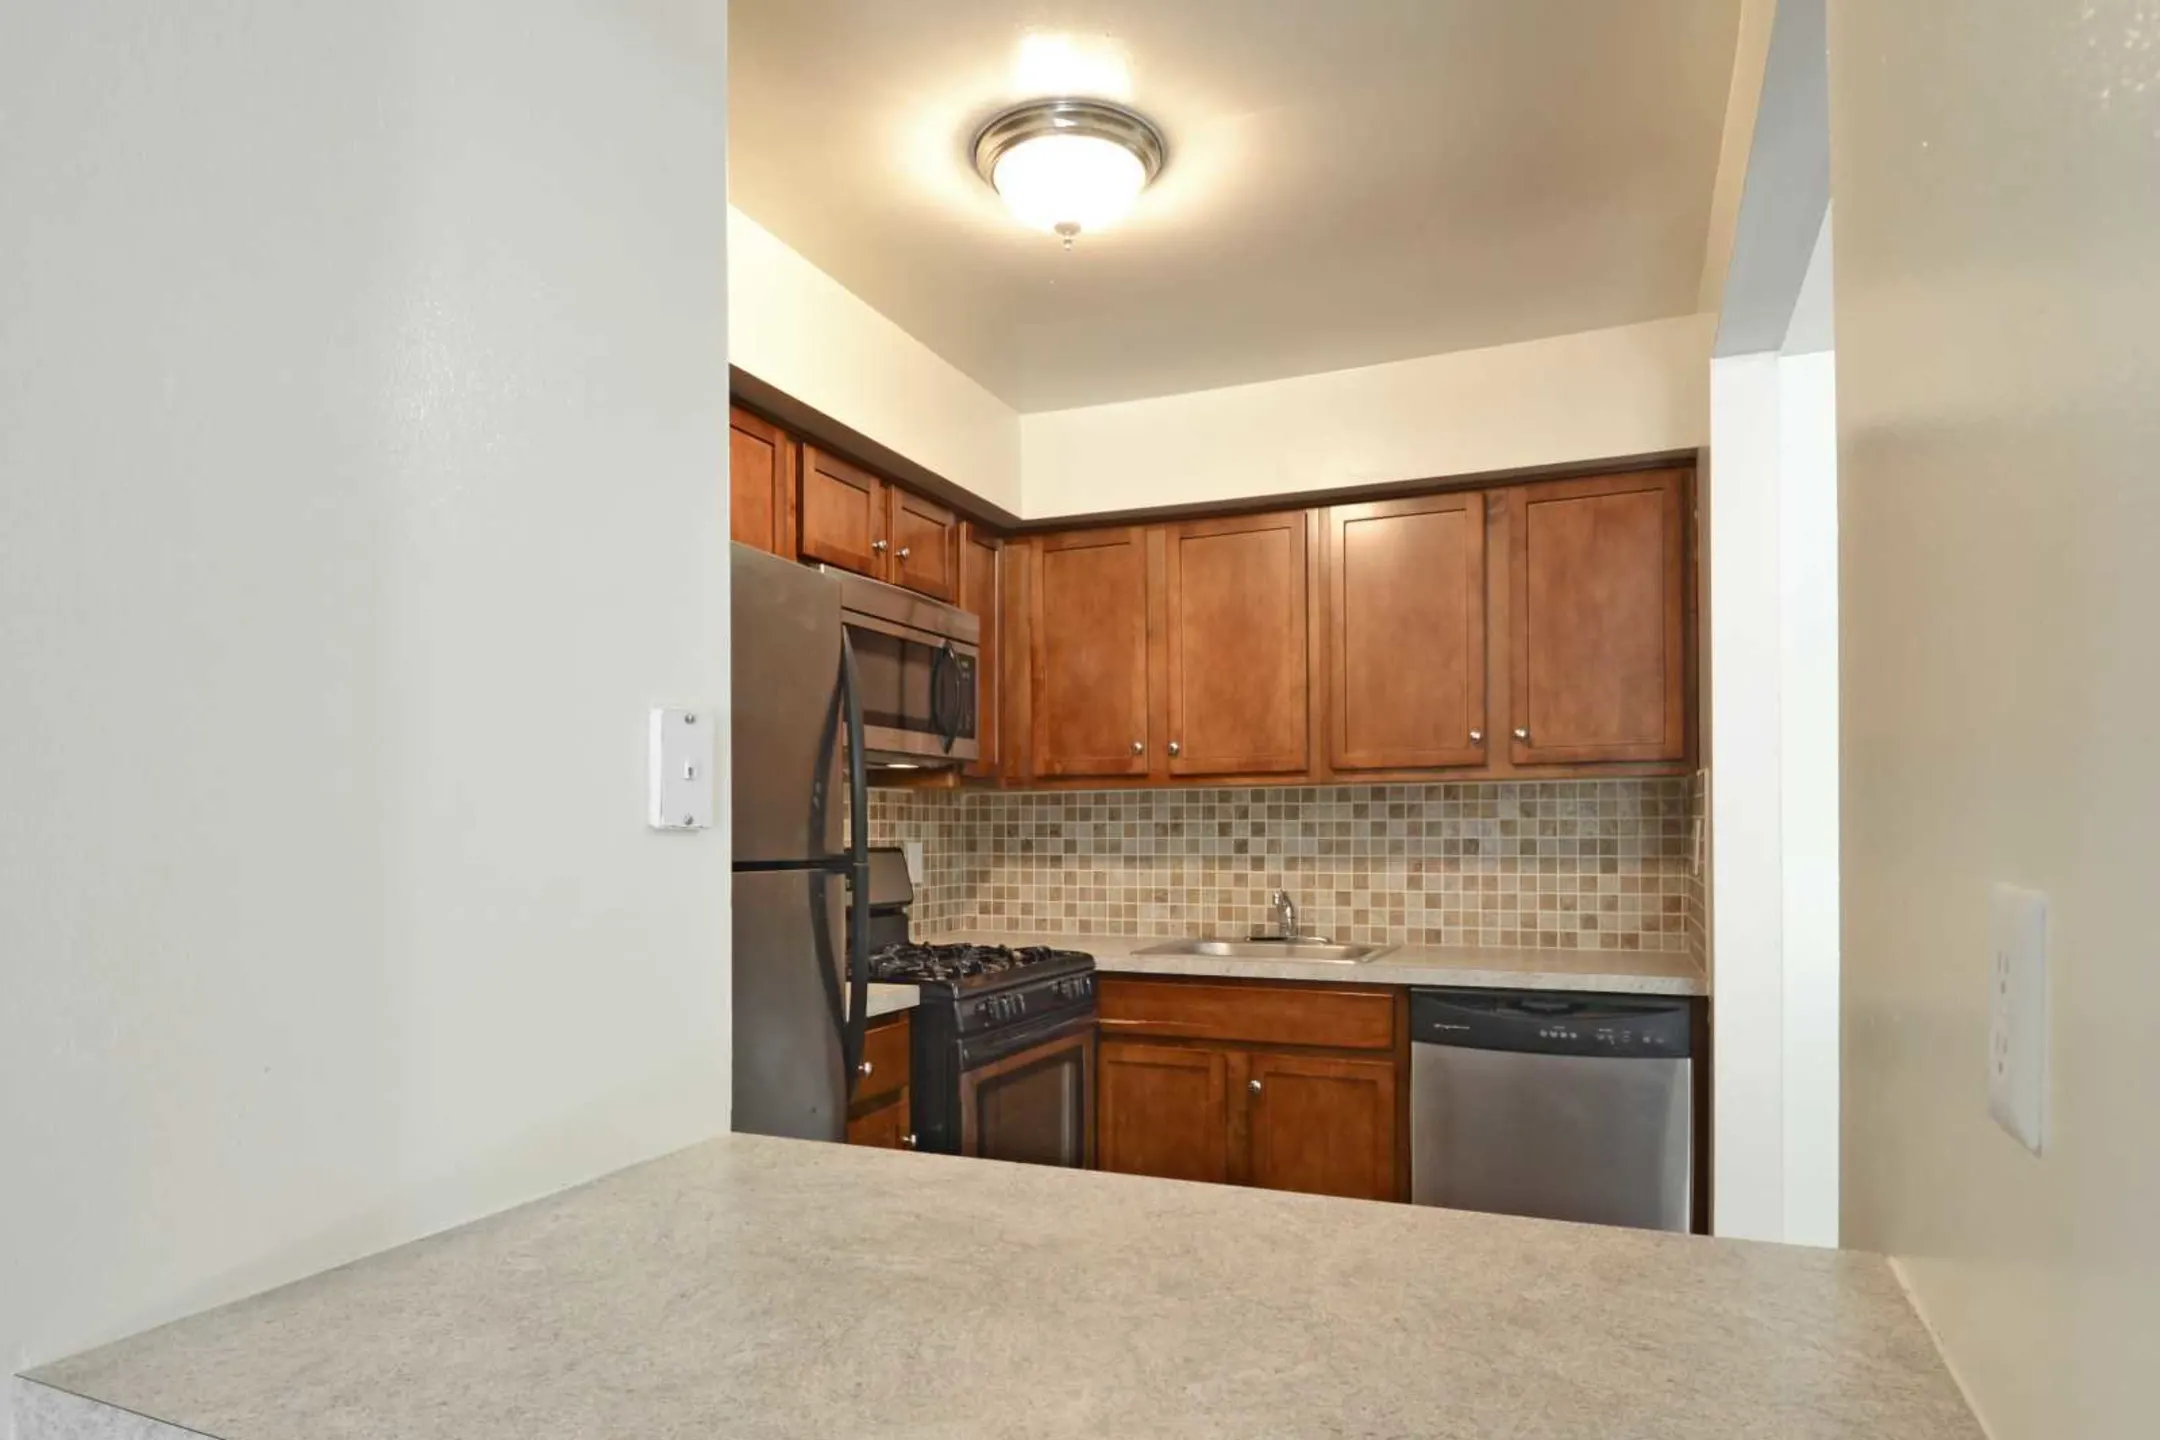 Kitchen - Twelve Trees Apartments And Townhomes - Harrisburg, PA